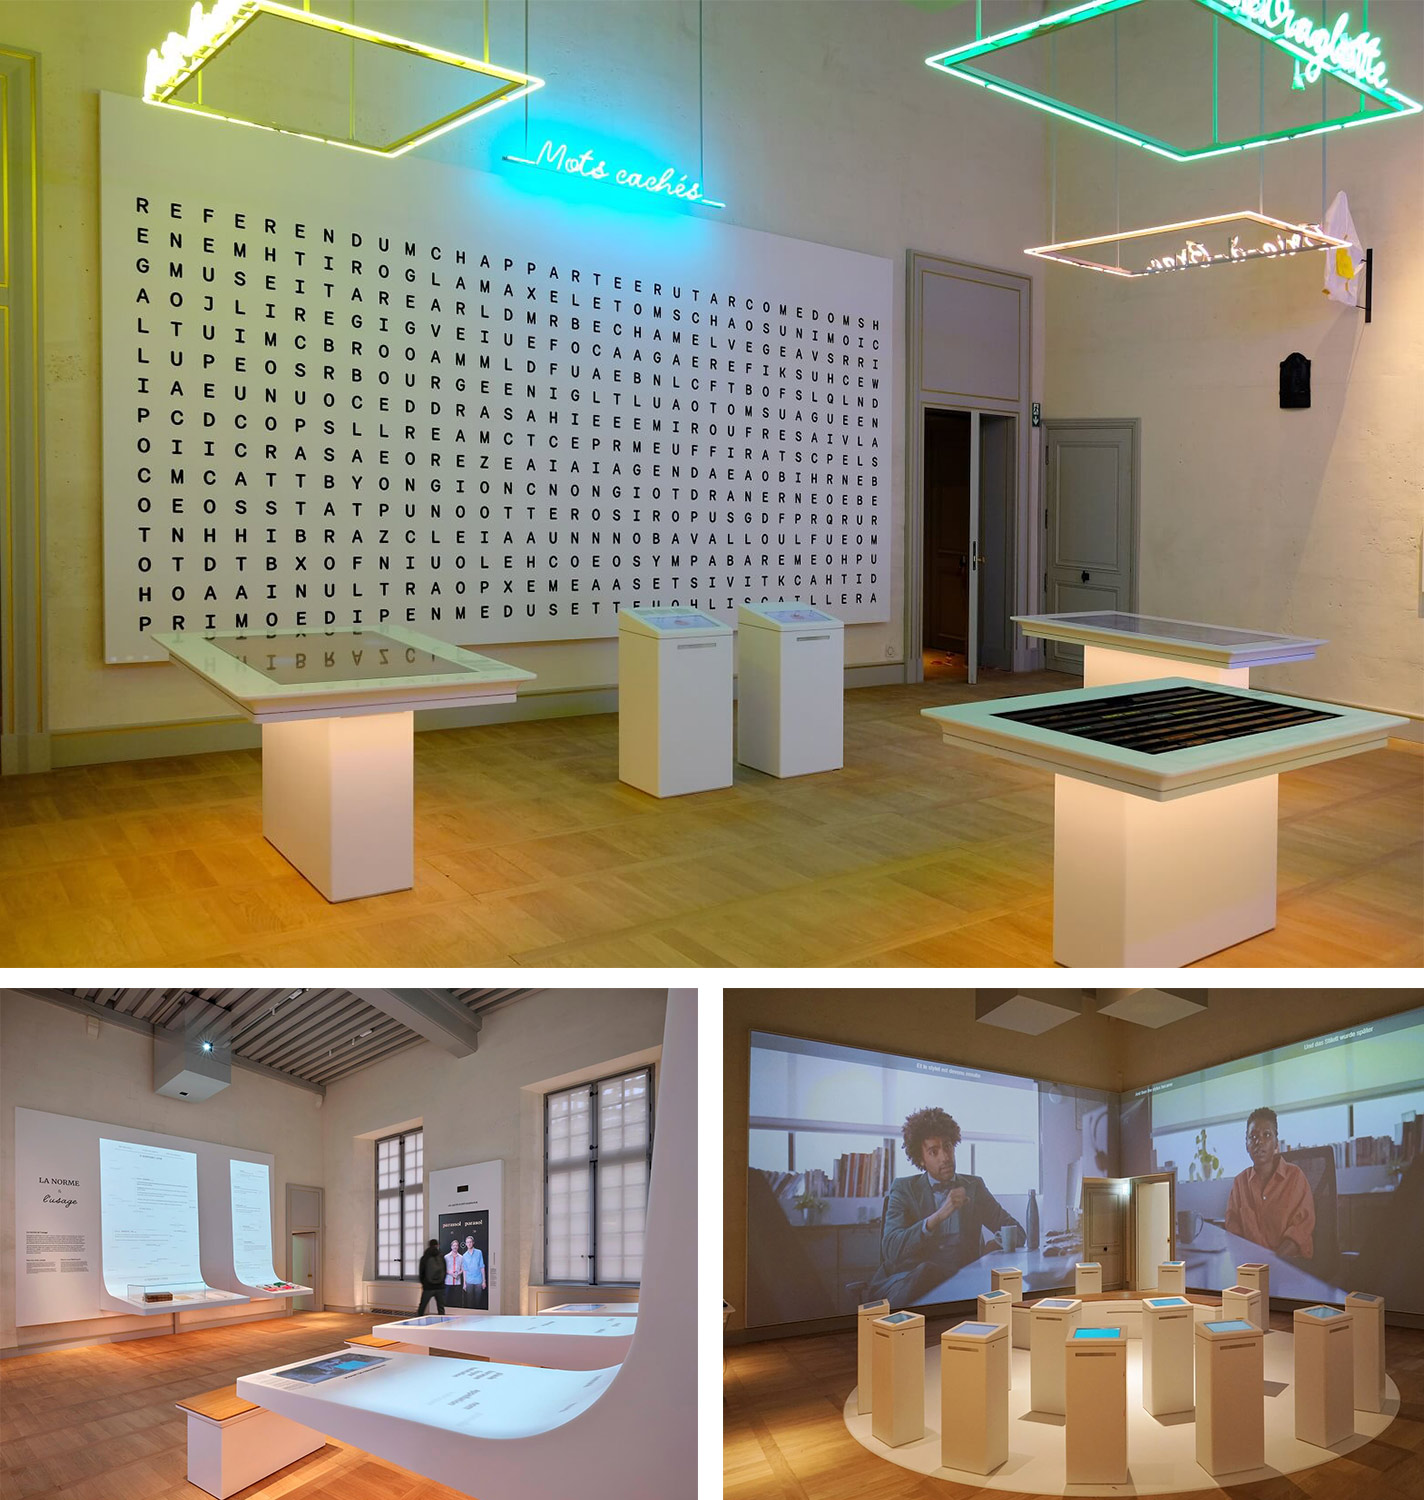 Cité Internationale de la Langue Française, Château de Villers-Cotterêts. Walls and furniture in Corian<sup>®</sup> Salt with integrated touch screens and backlighting. Images Sébastien Veronese, all rights reserved.